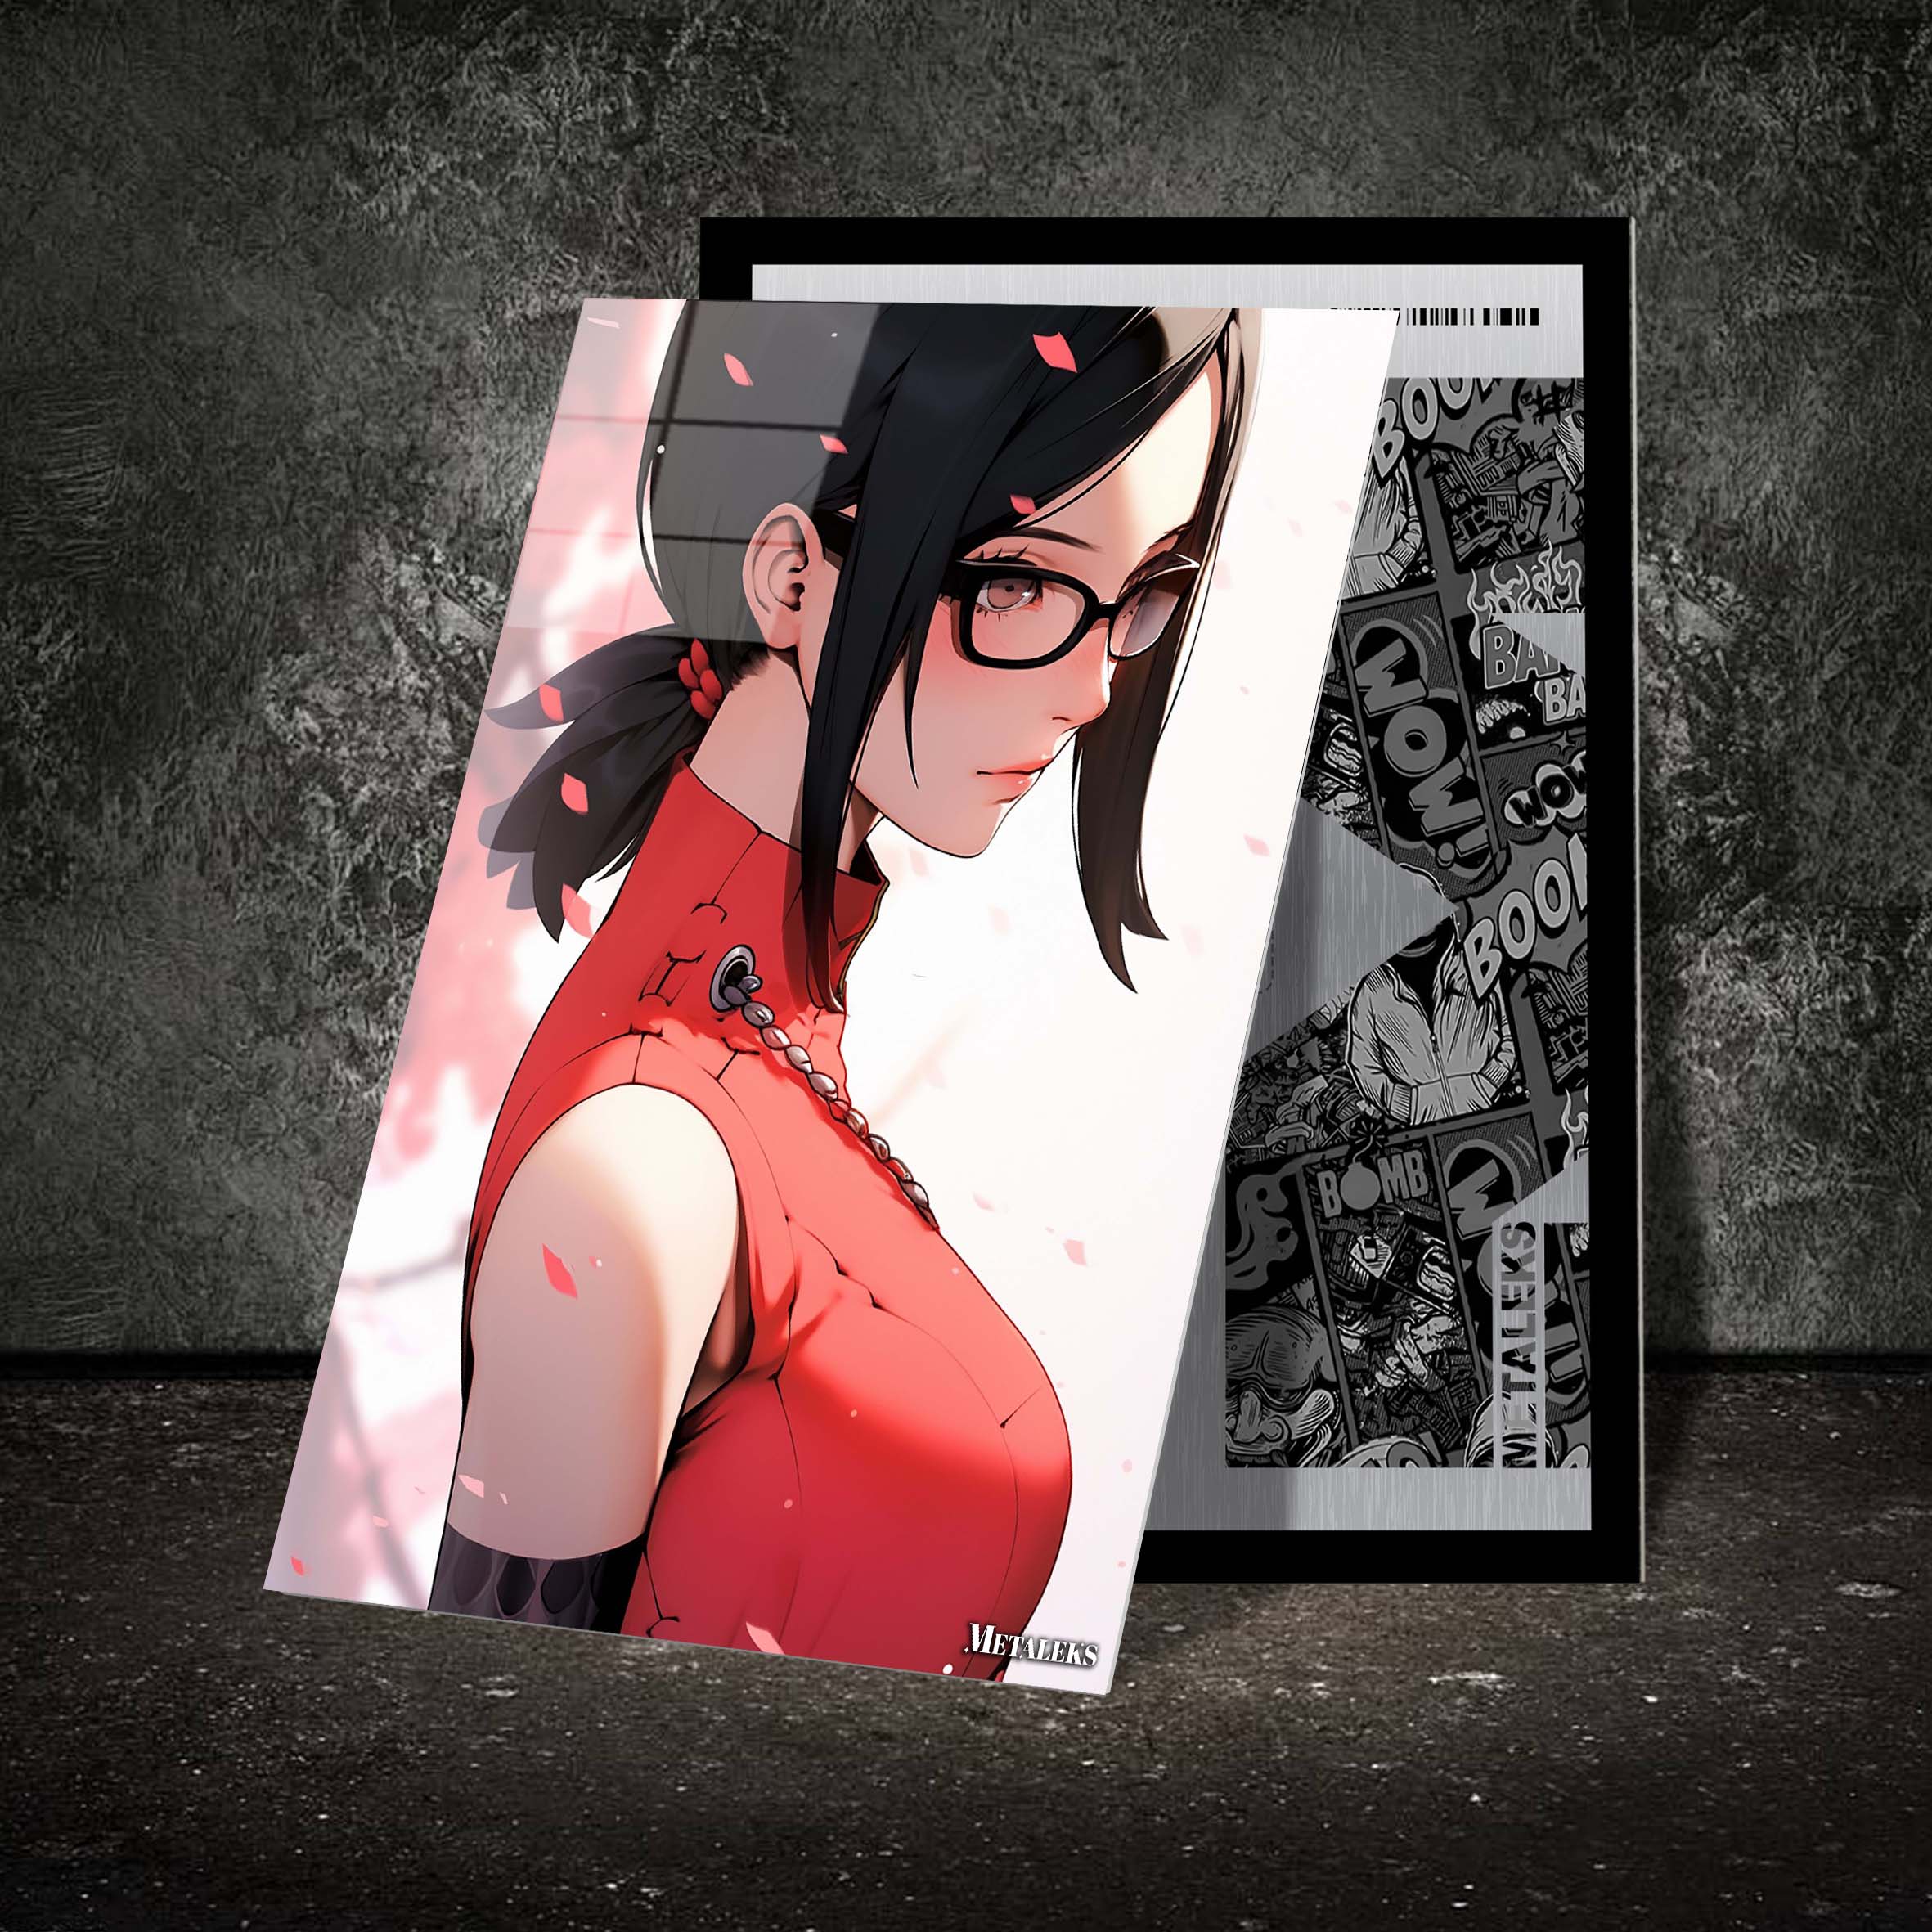 Uchiha Legacy_ Sarada's Journey in the Shadow of Legends-designed by @theanimecrossover